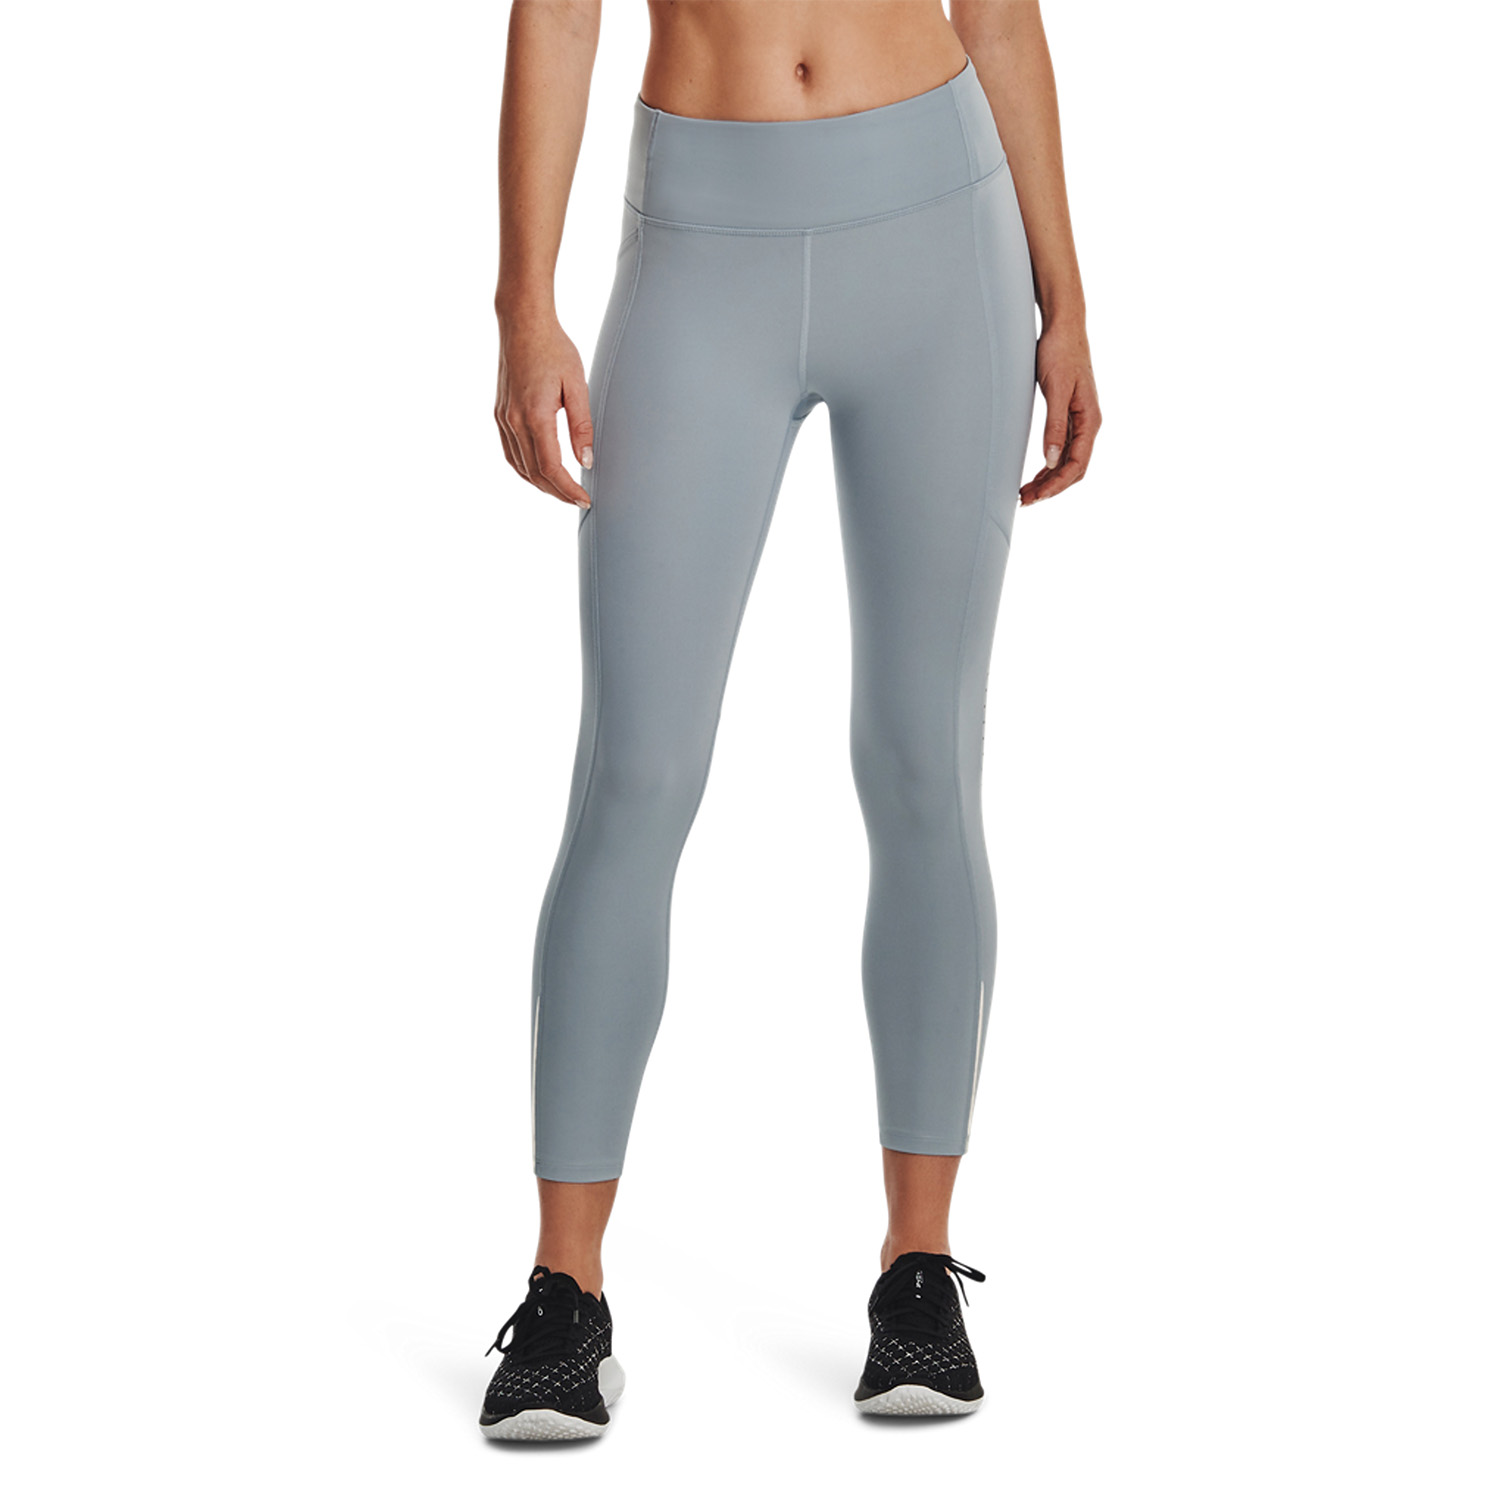 Under Armour Fly Fast Women's Running Tights - Harbor Blue